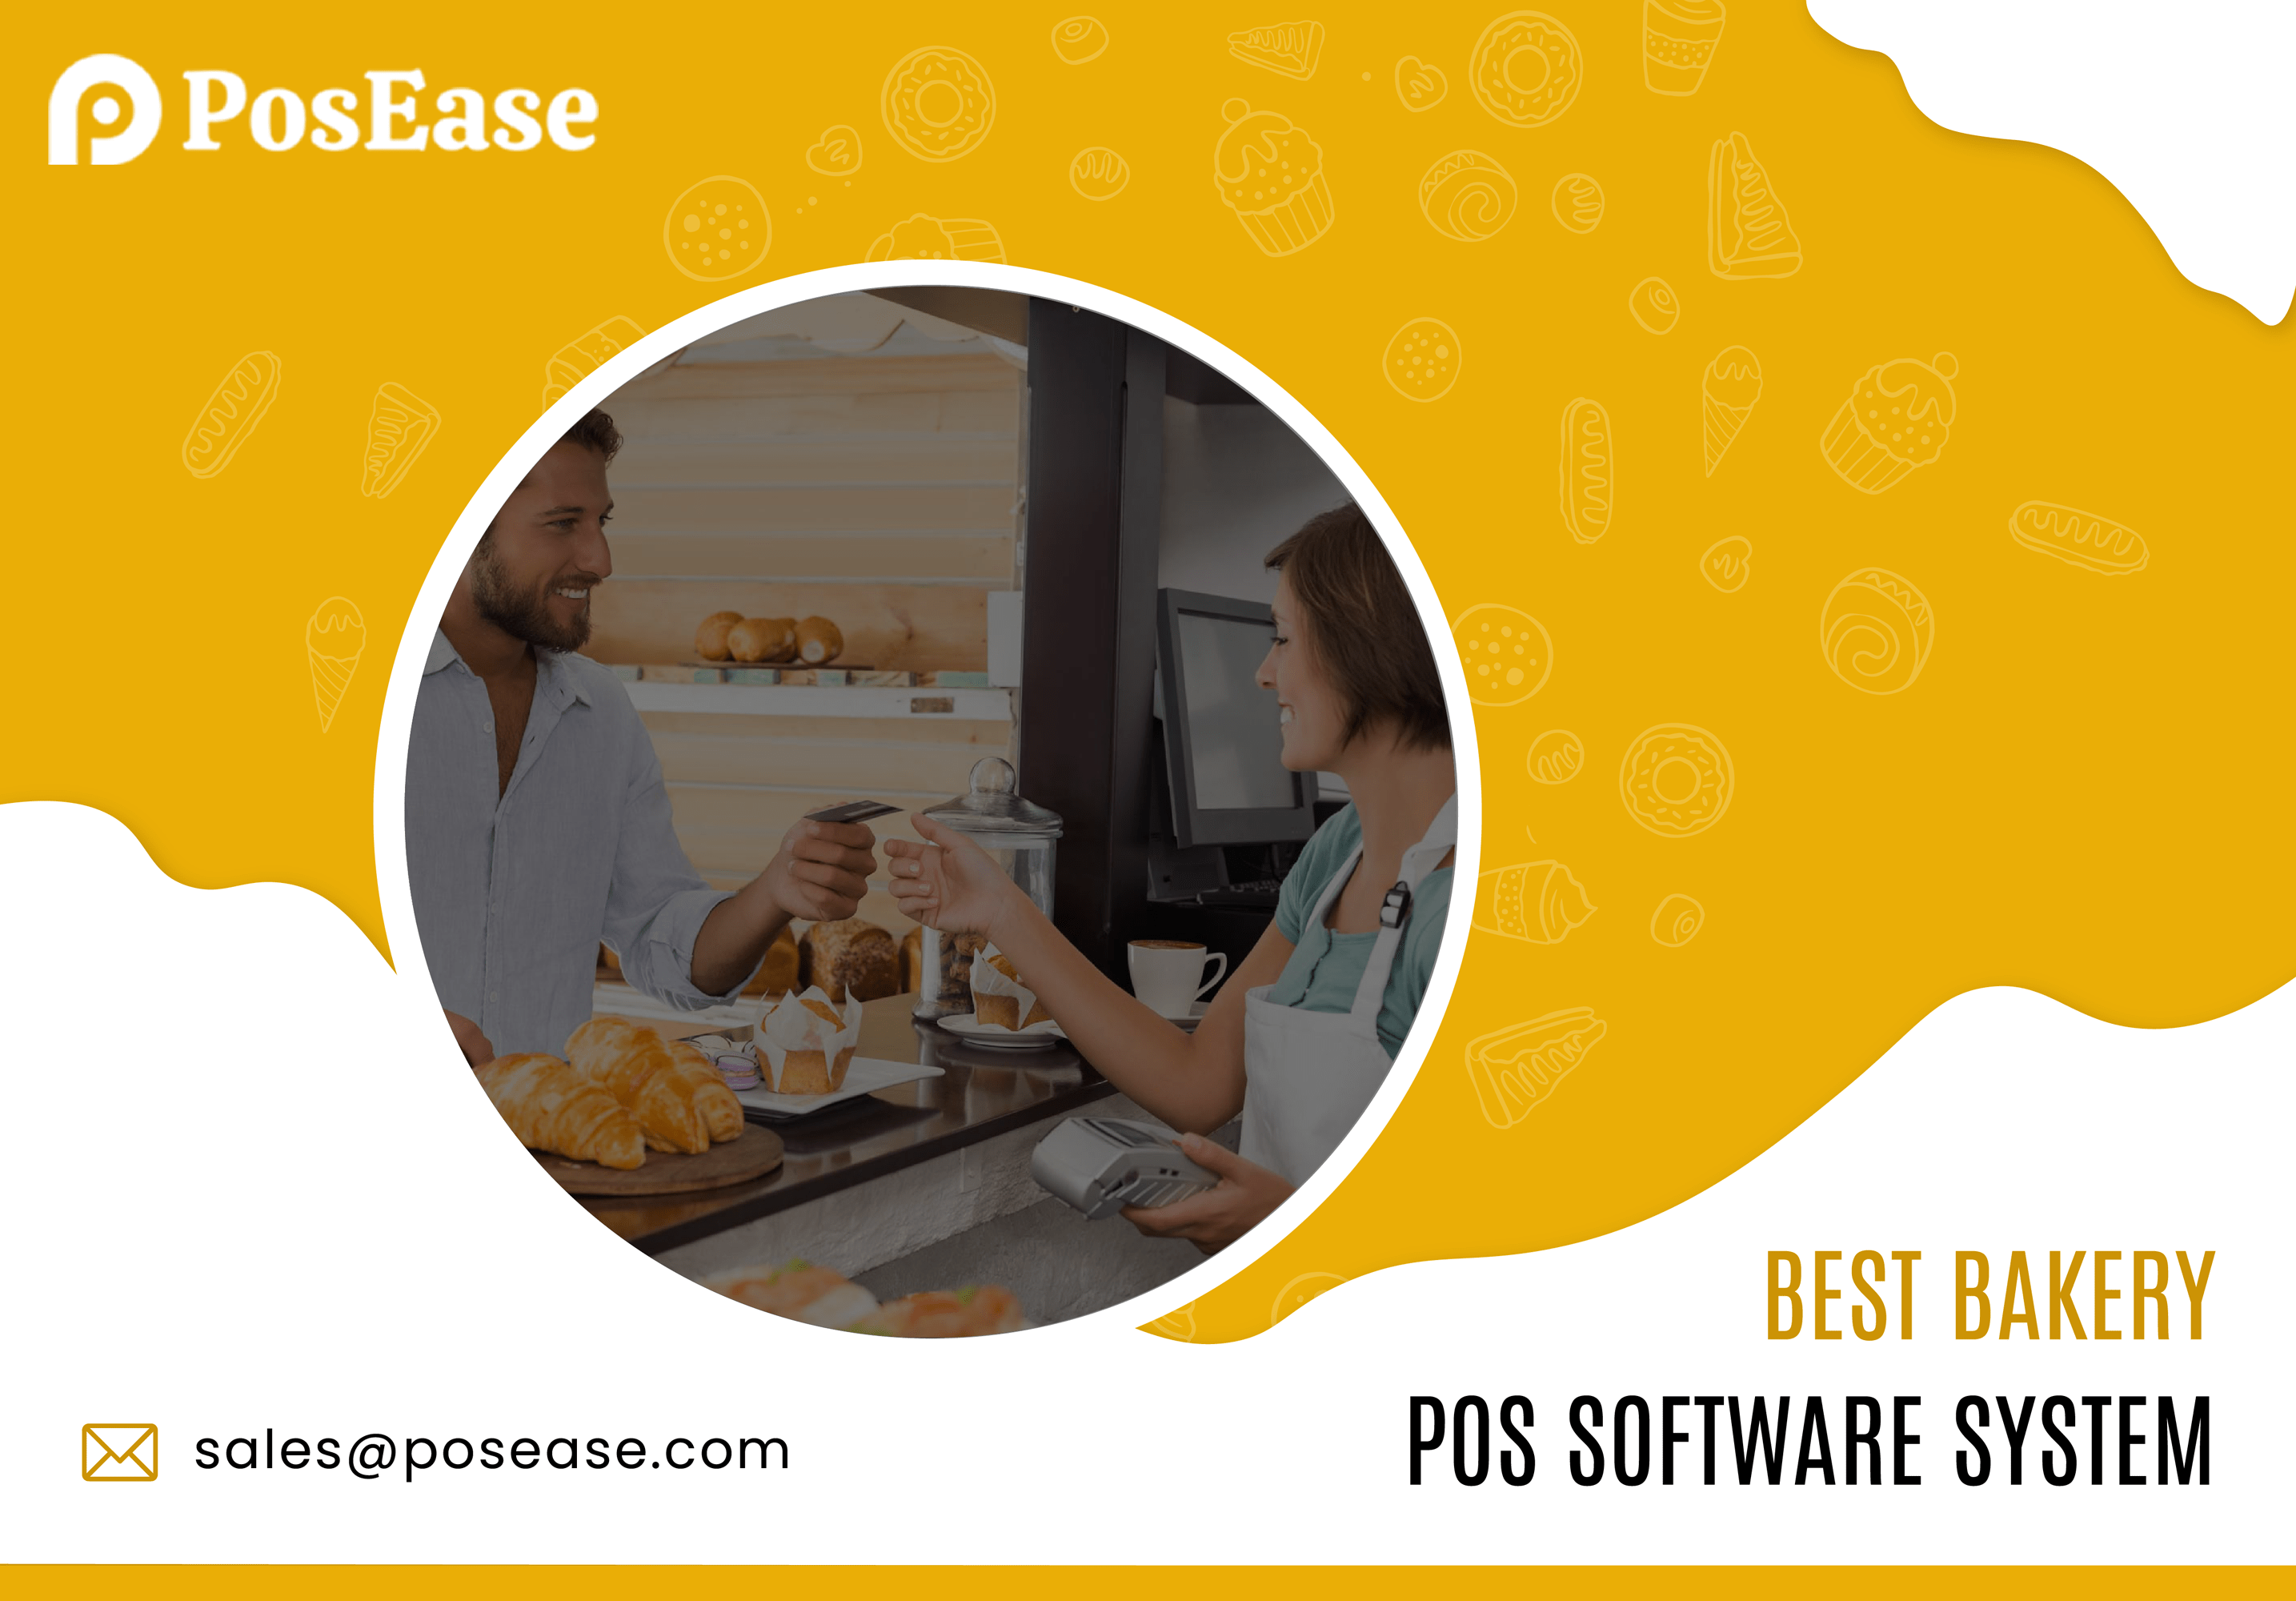 Best bakery POS software system